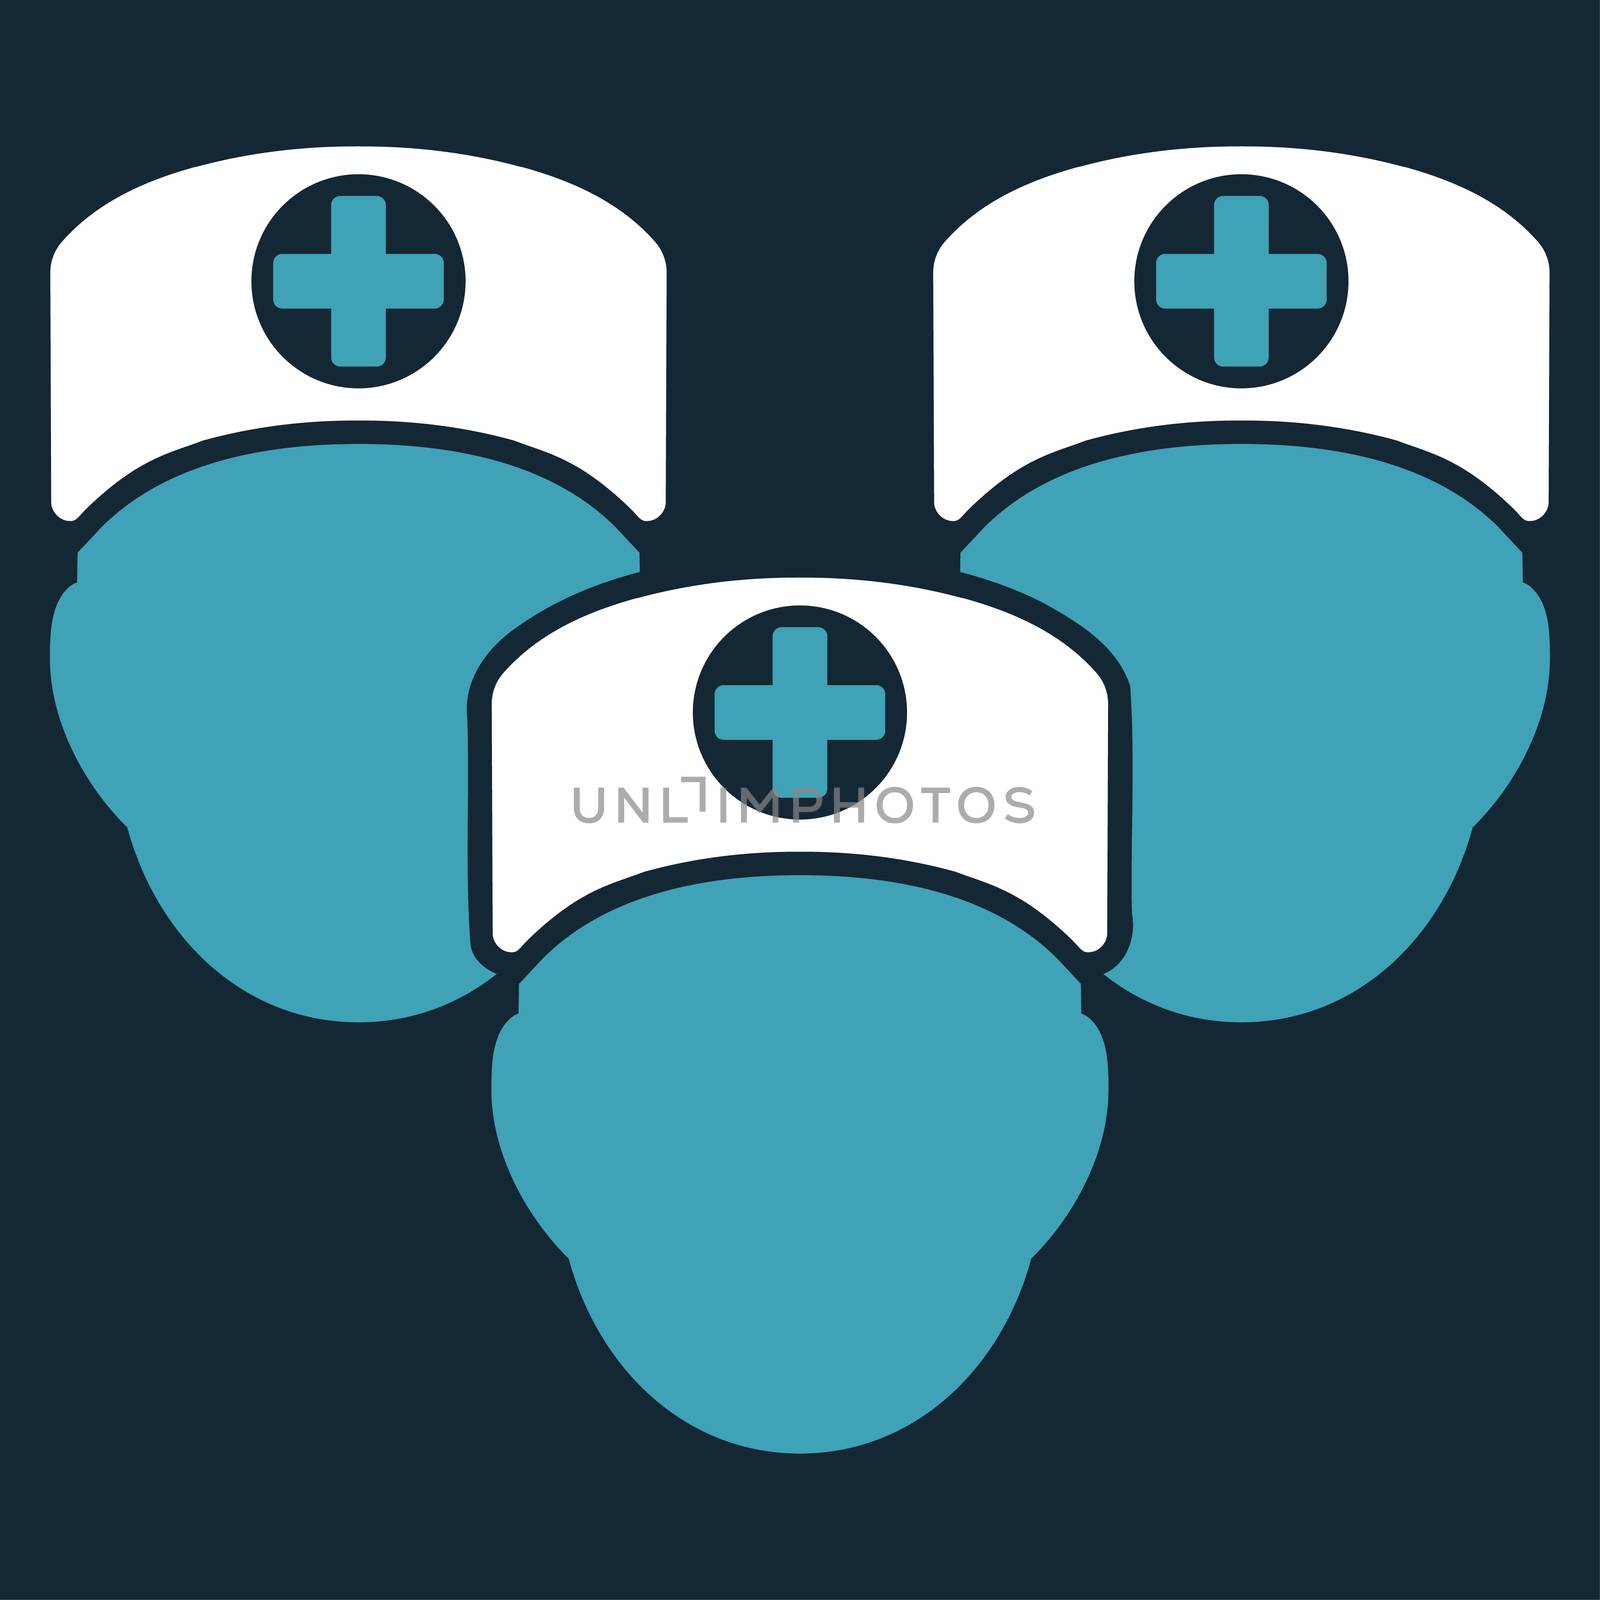 Medical Staff raster icon. Style is bicolor flat symbol, blue and white colors, rounded angles, dark blue background.